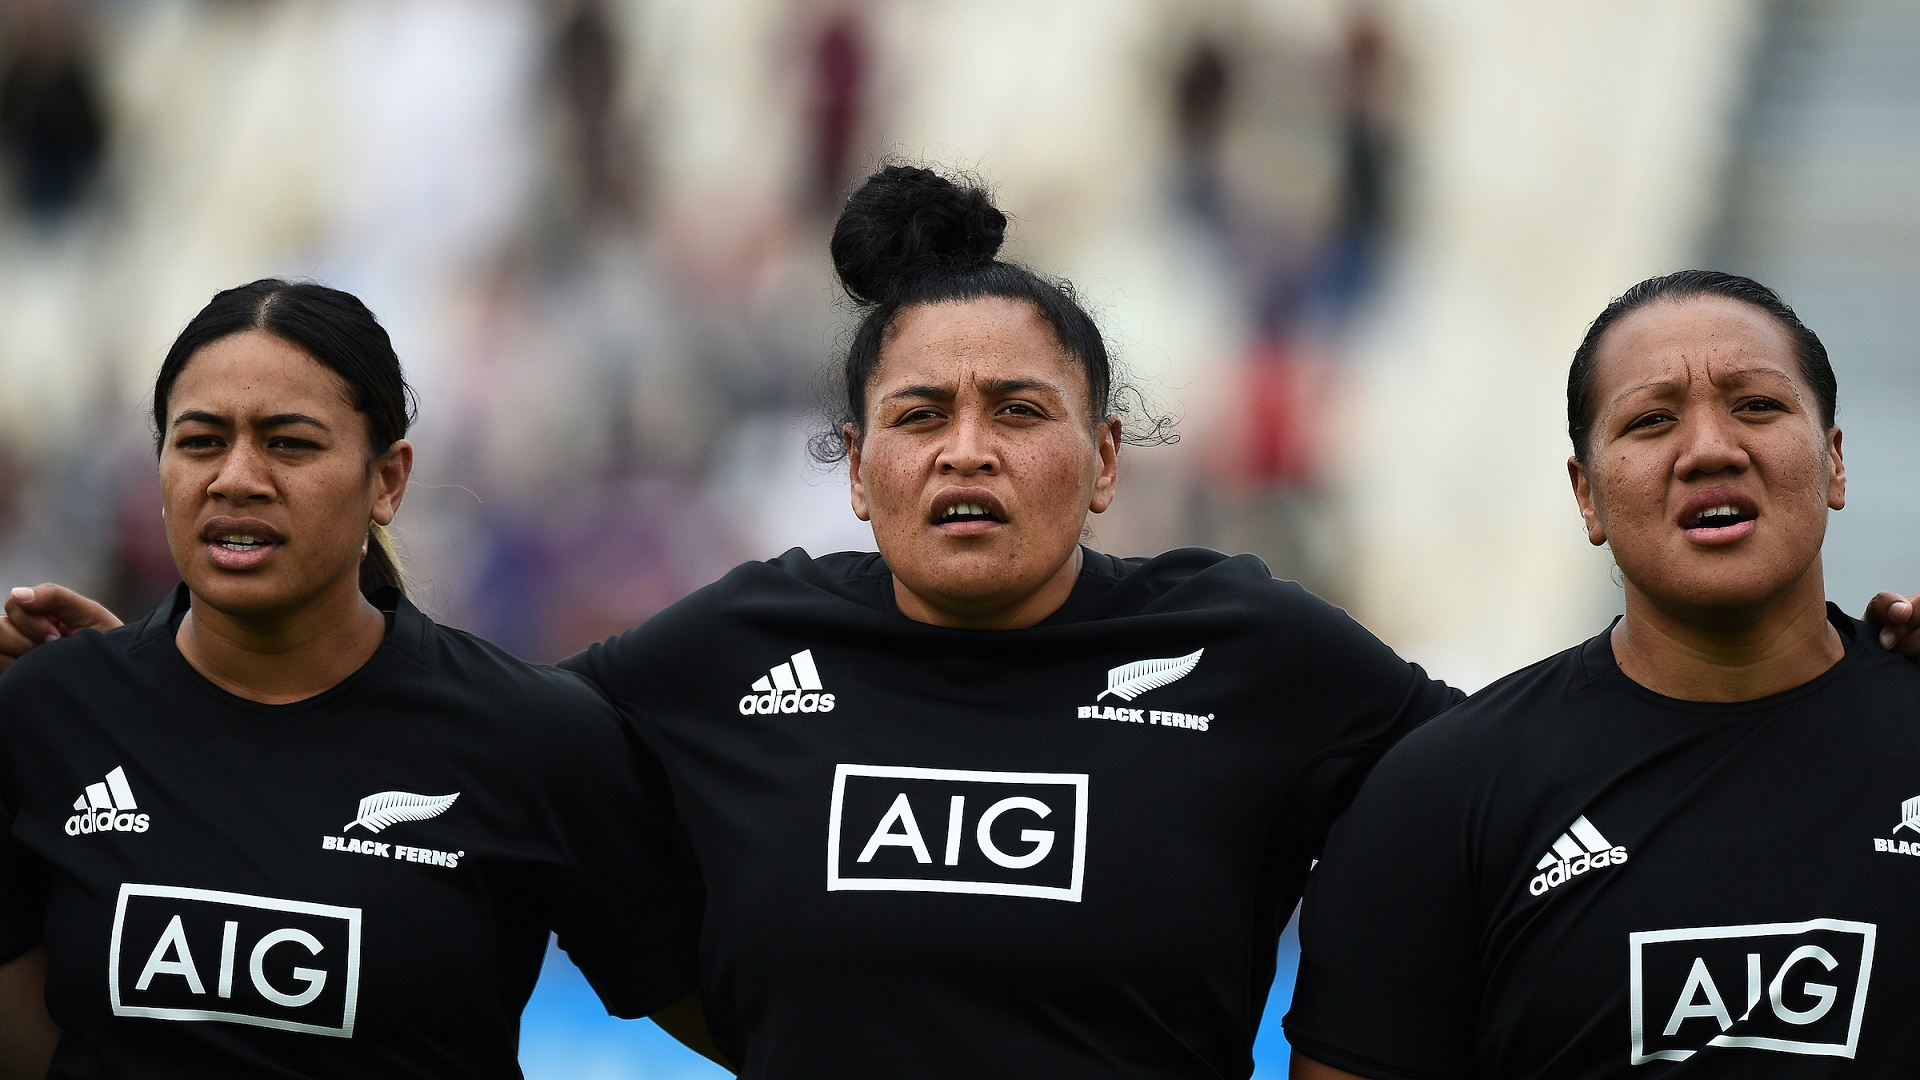 Adidas Angers All Blacks Fans With Jersey Prices - The New York Times